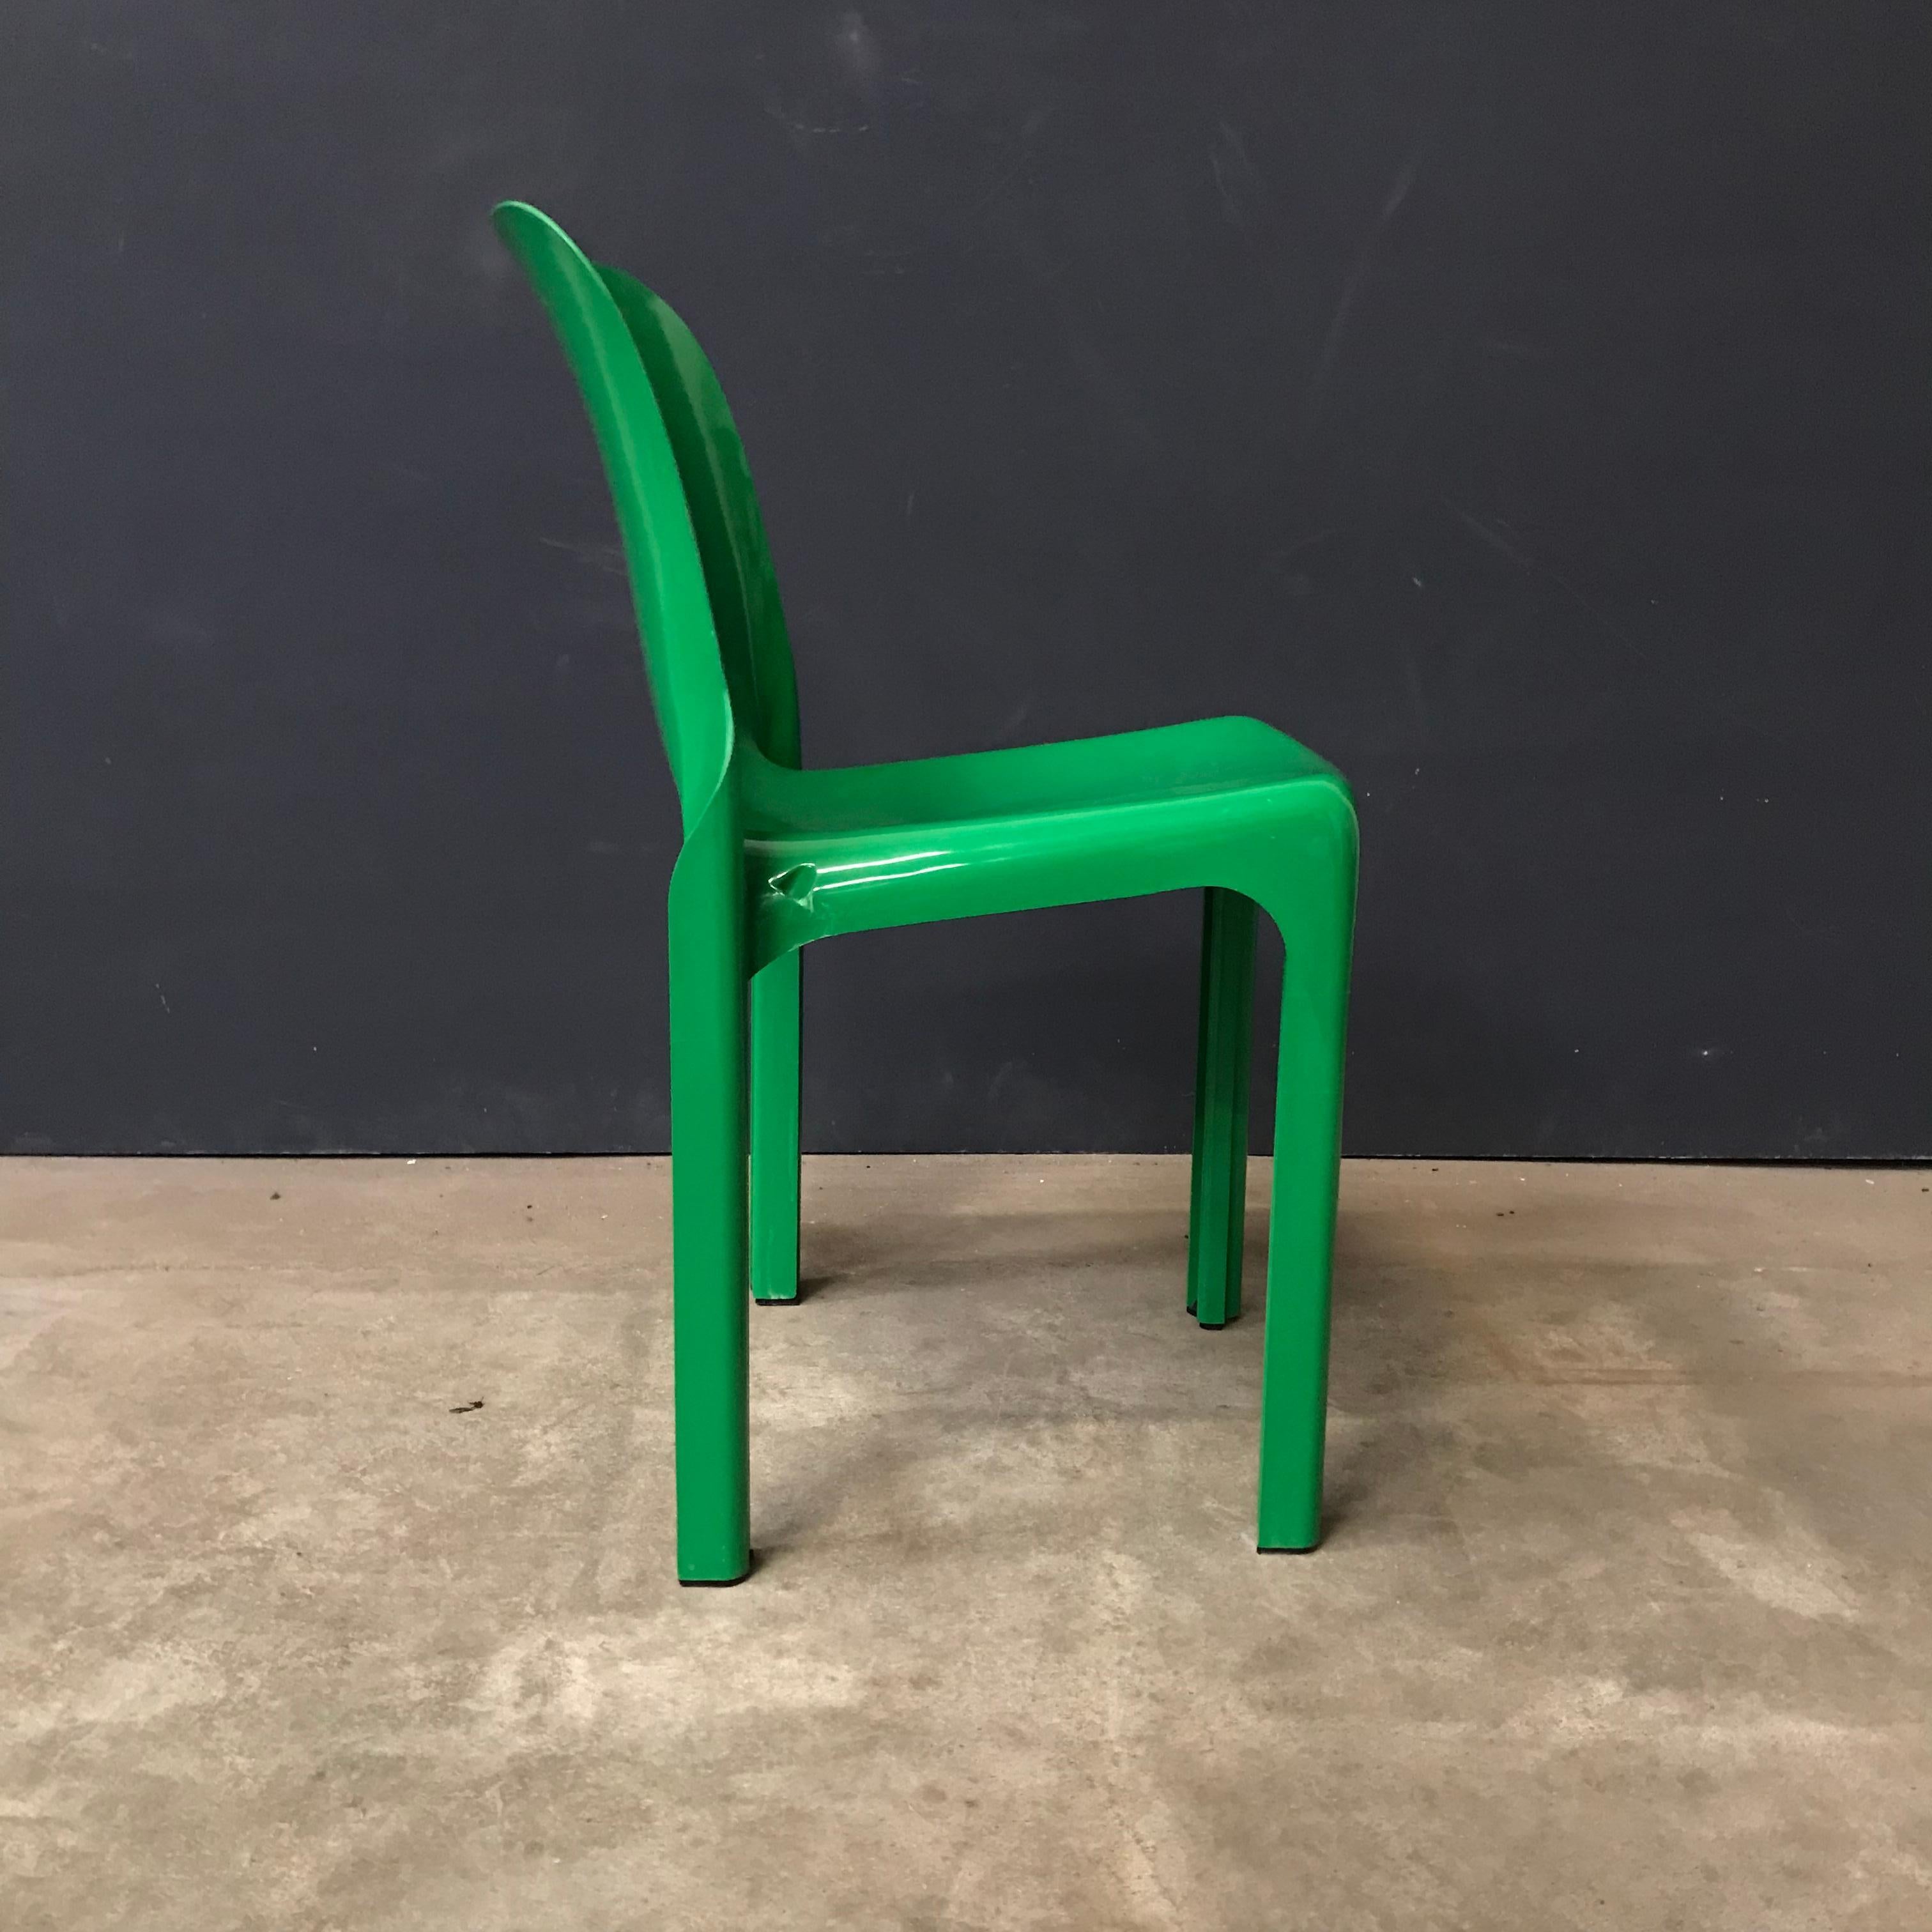 Selene chair in beautiful light green. The chair is in good condition except for some small scratches on the seat is a moist stain (picture #5). The top edge has some tiny damage but hardly visible (#9). Overall the chair is in a good condition and